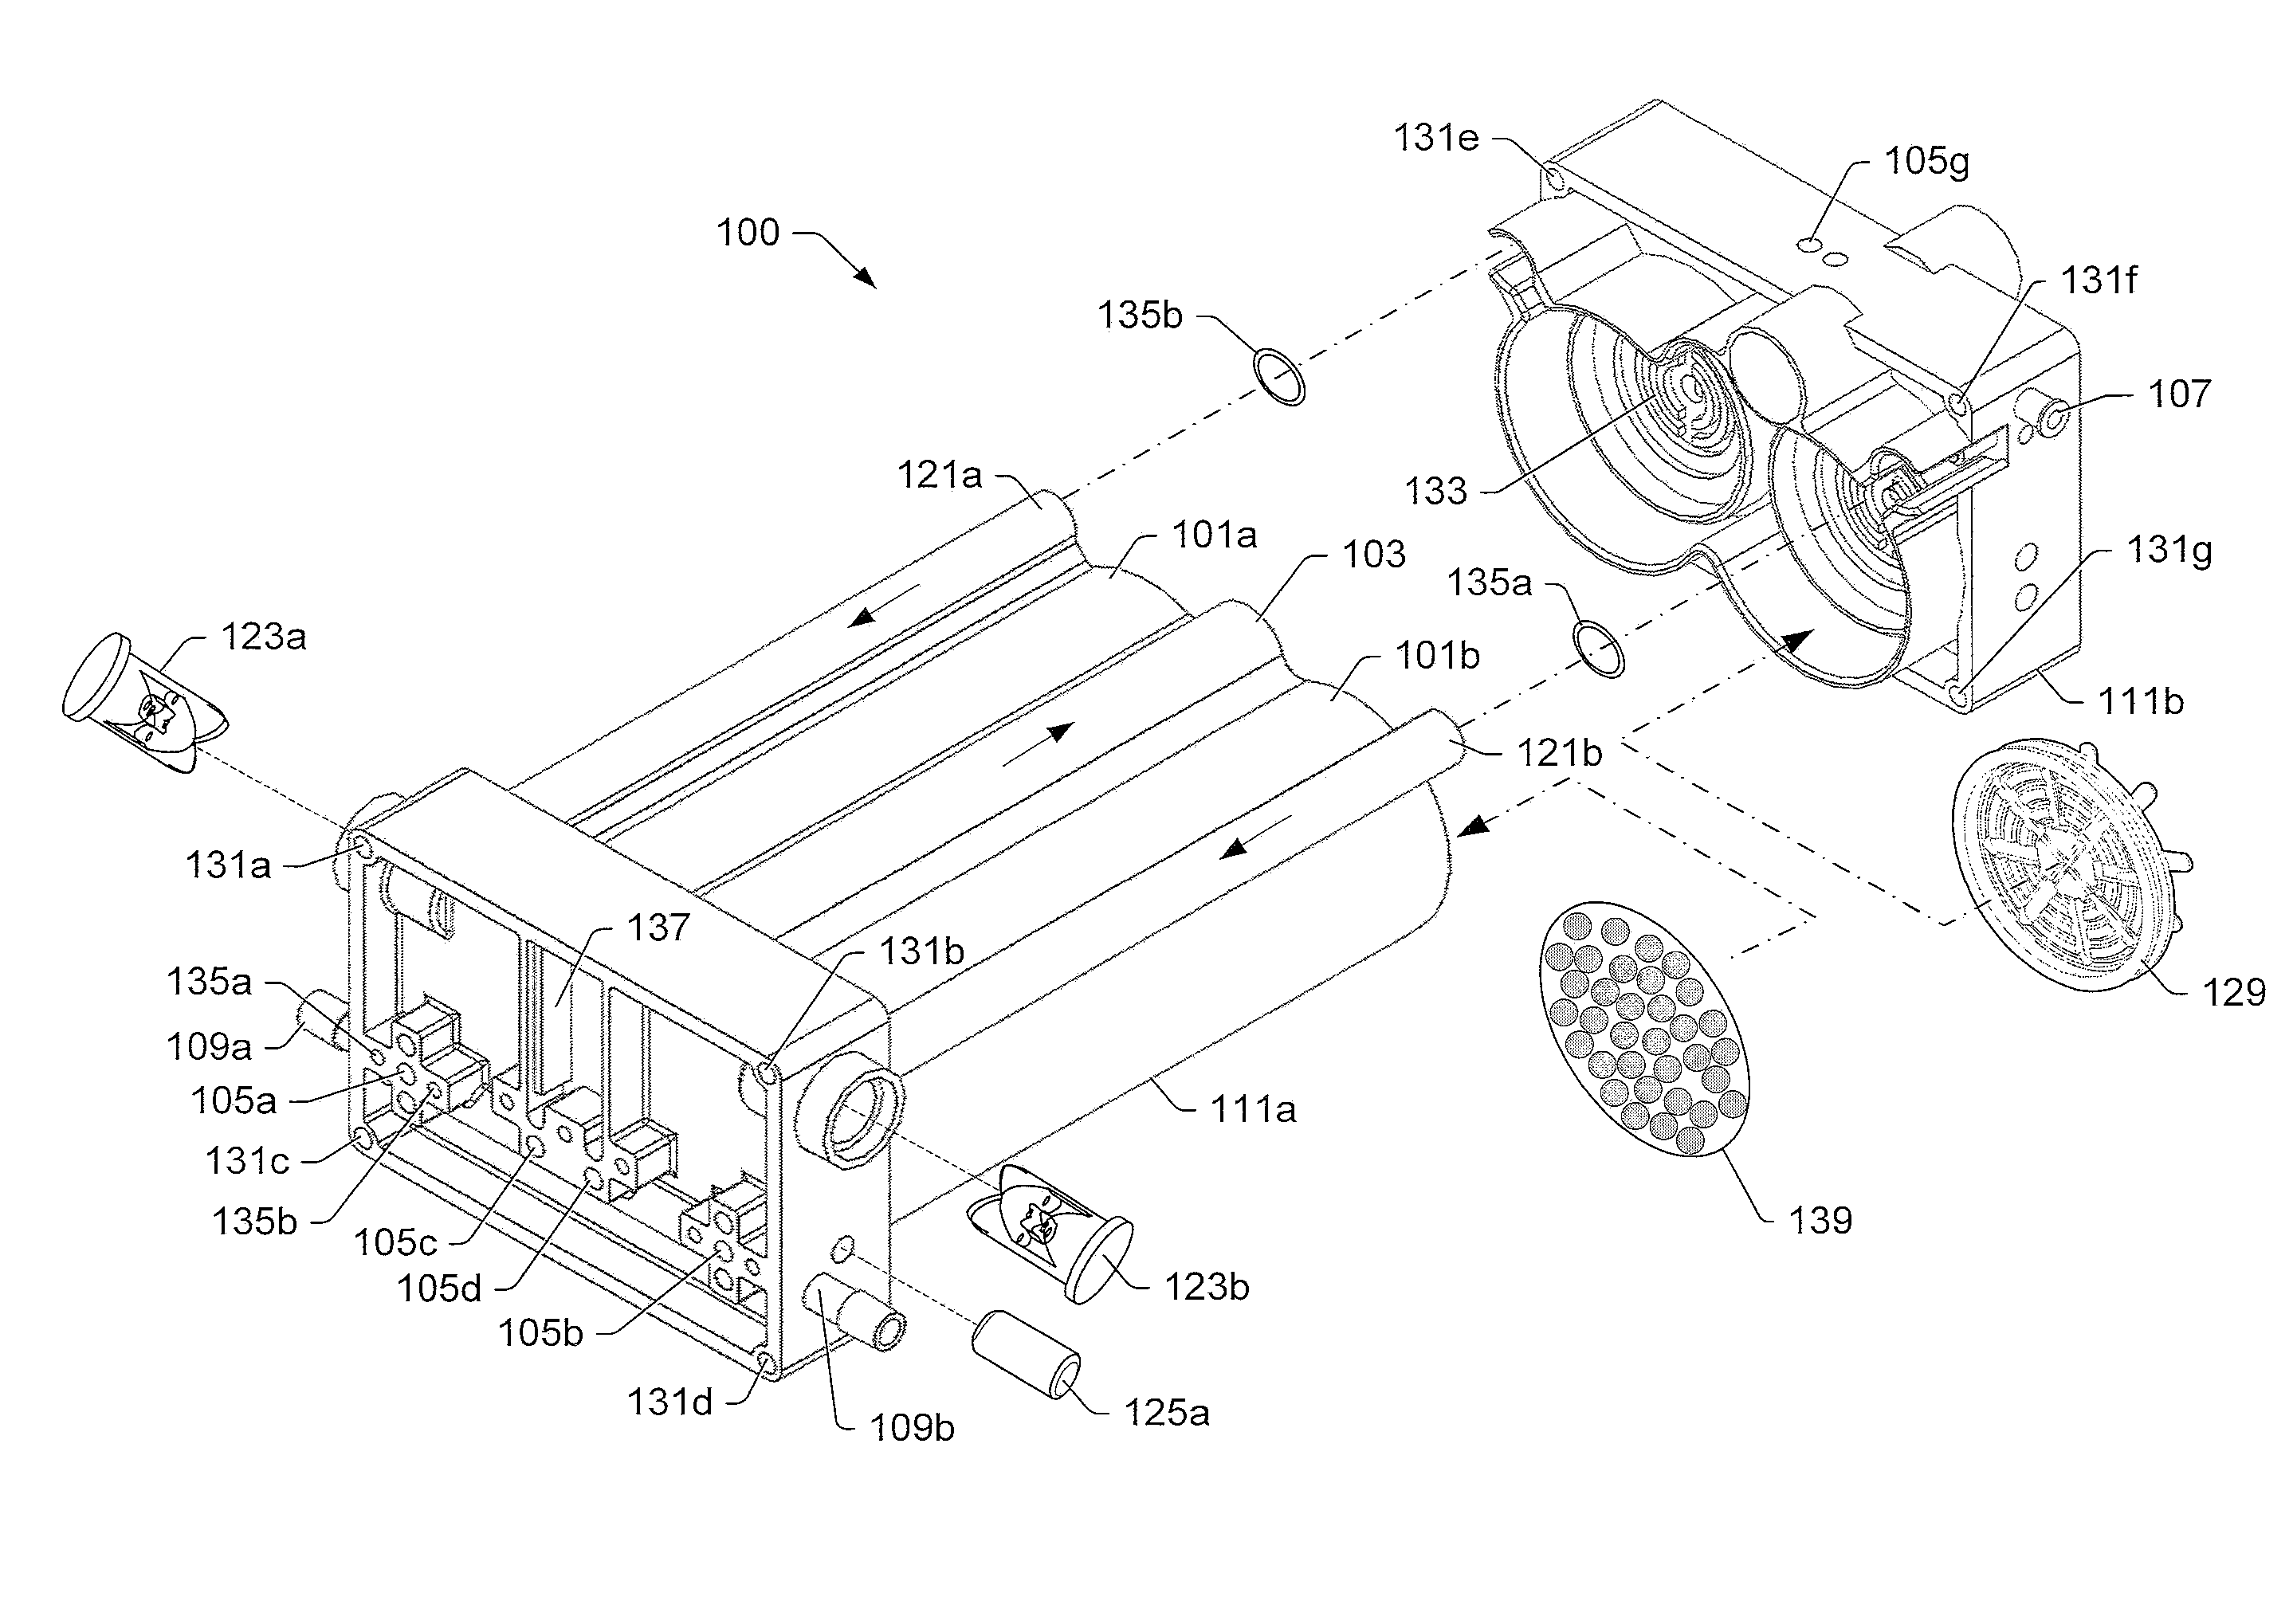 Oxygen concentrator apparatus and method having flow restricted coupling of the canisters